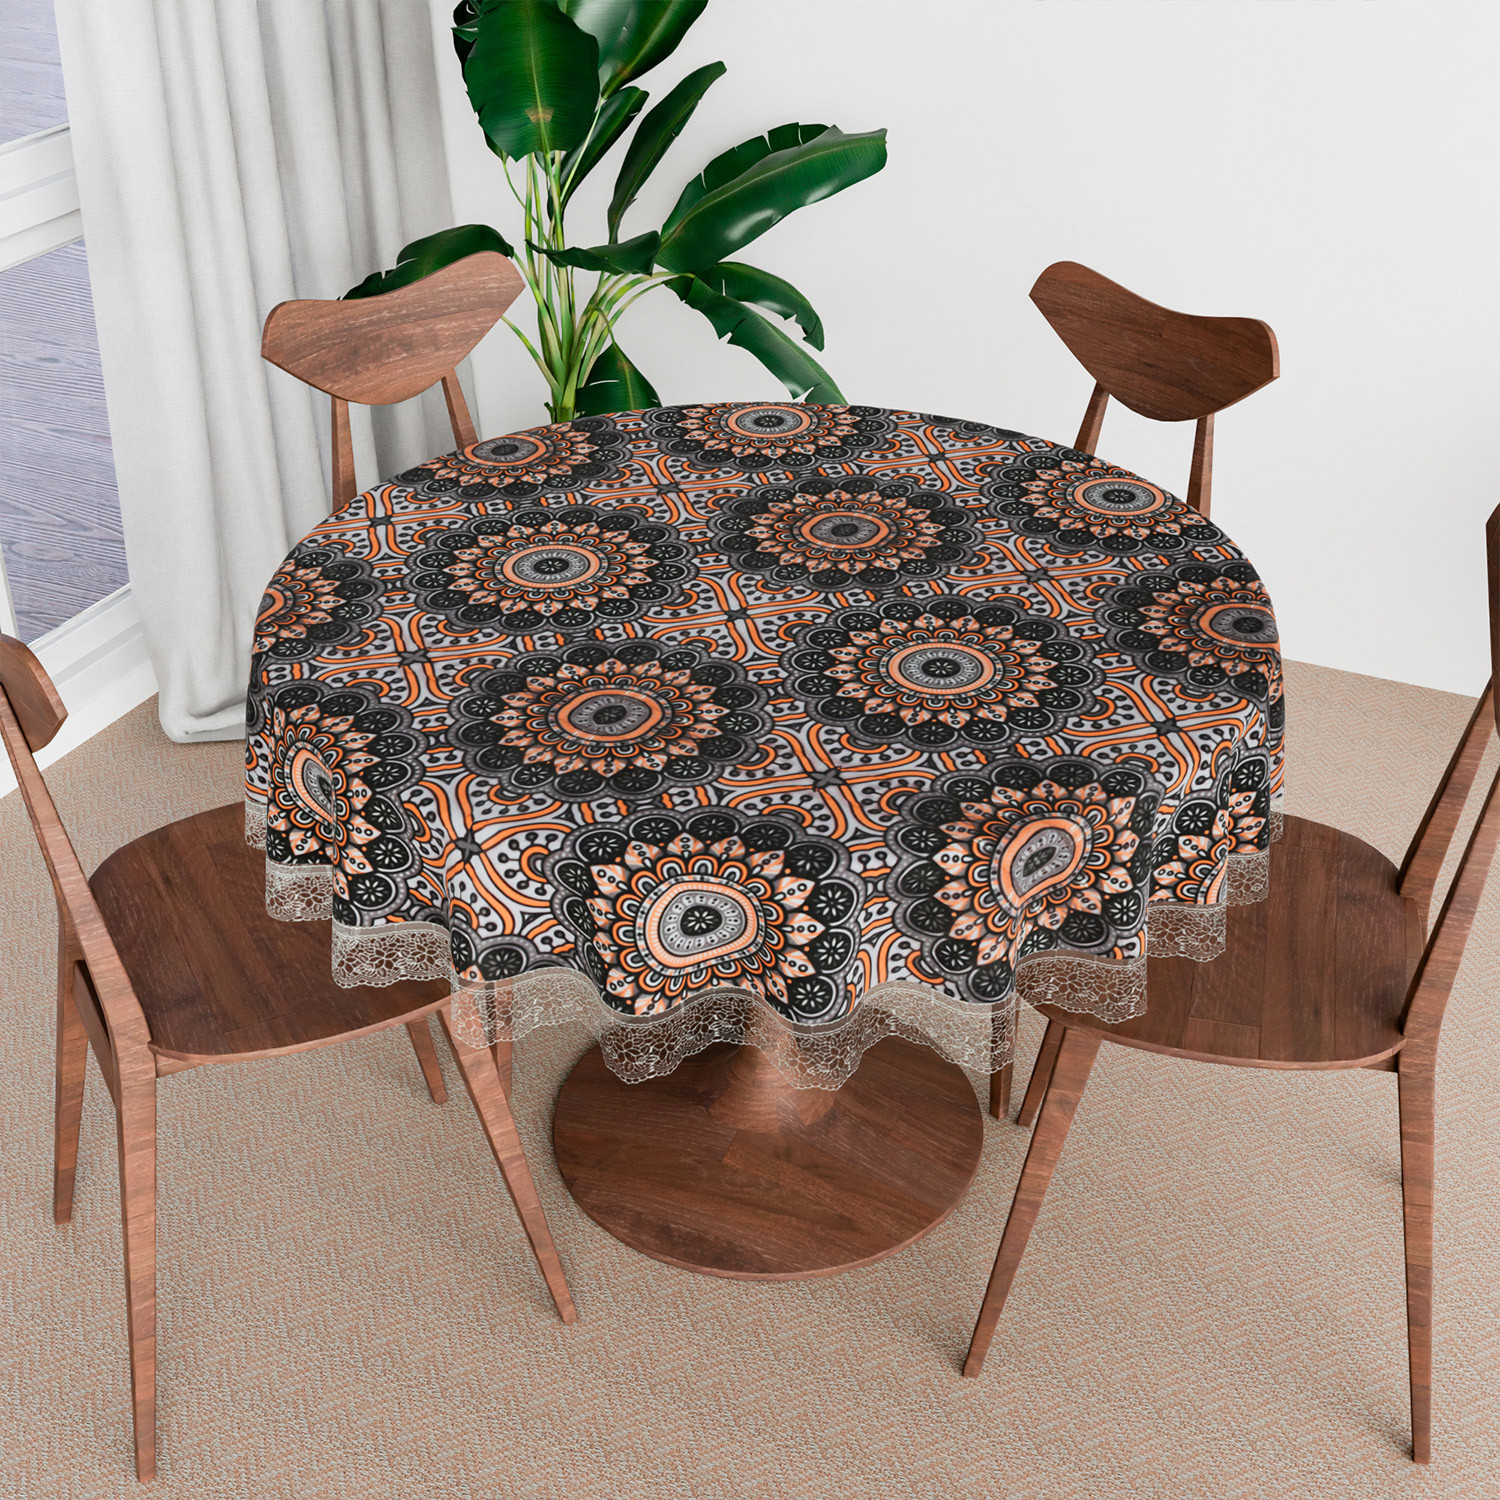 Kuber Industries Round Table Cover | PVC Table Cloth for Round Tables | 4 Seater Round Table Cloth | Rangoli Kitchen Dining Tablecloth | Tabletop Cover | 60 Inch | Black